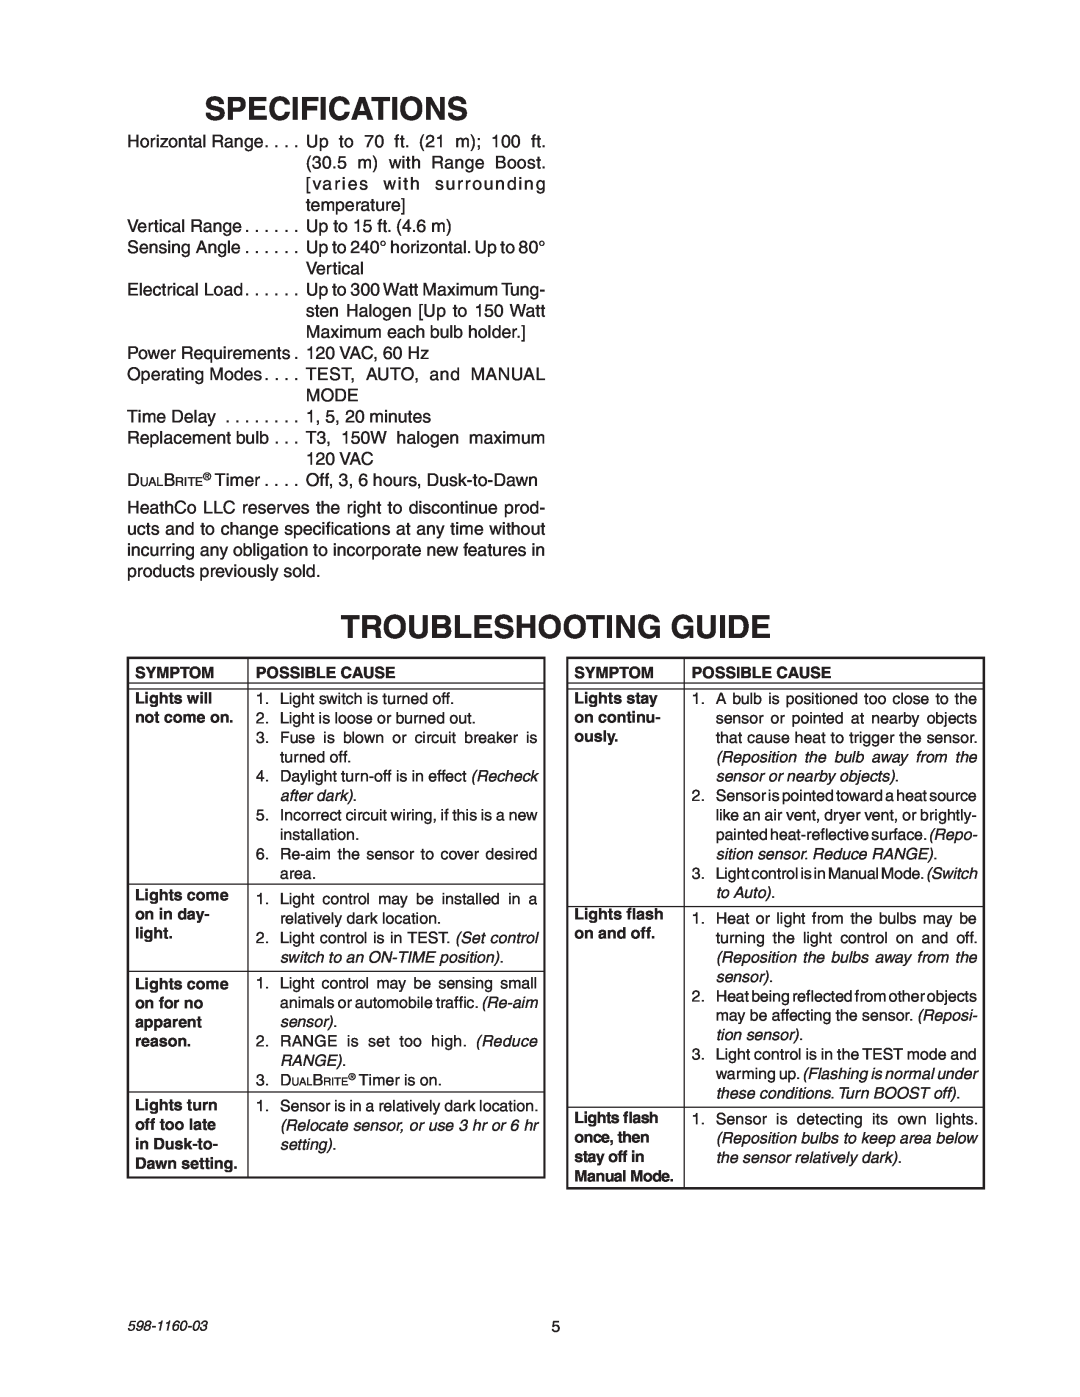 Heath Zenith SH-5512 manual Specifications, Troubleshooting Guide 